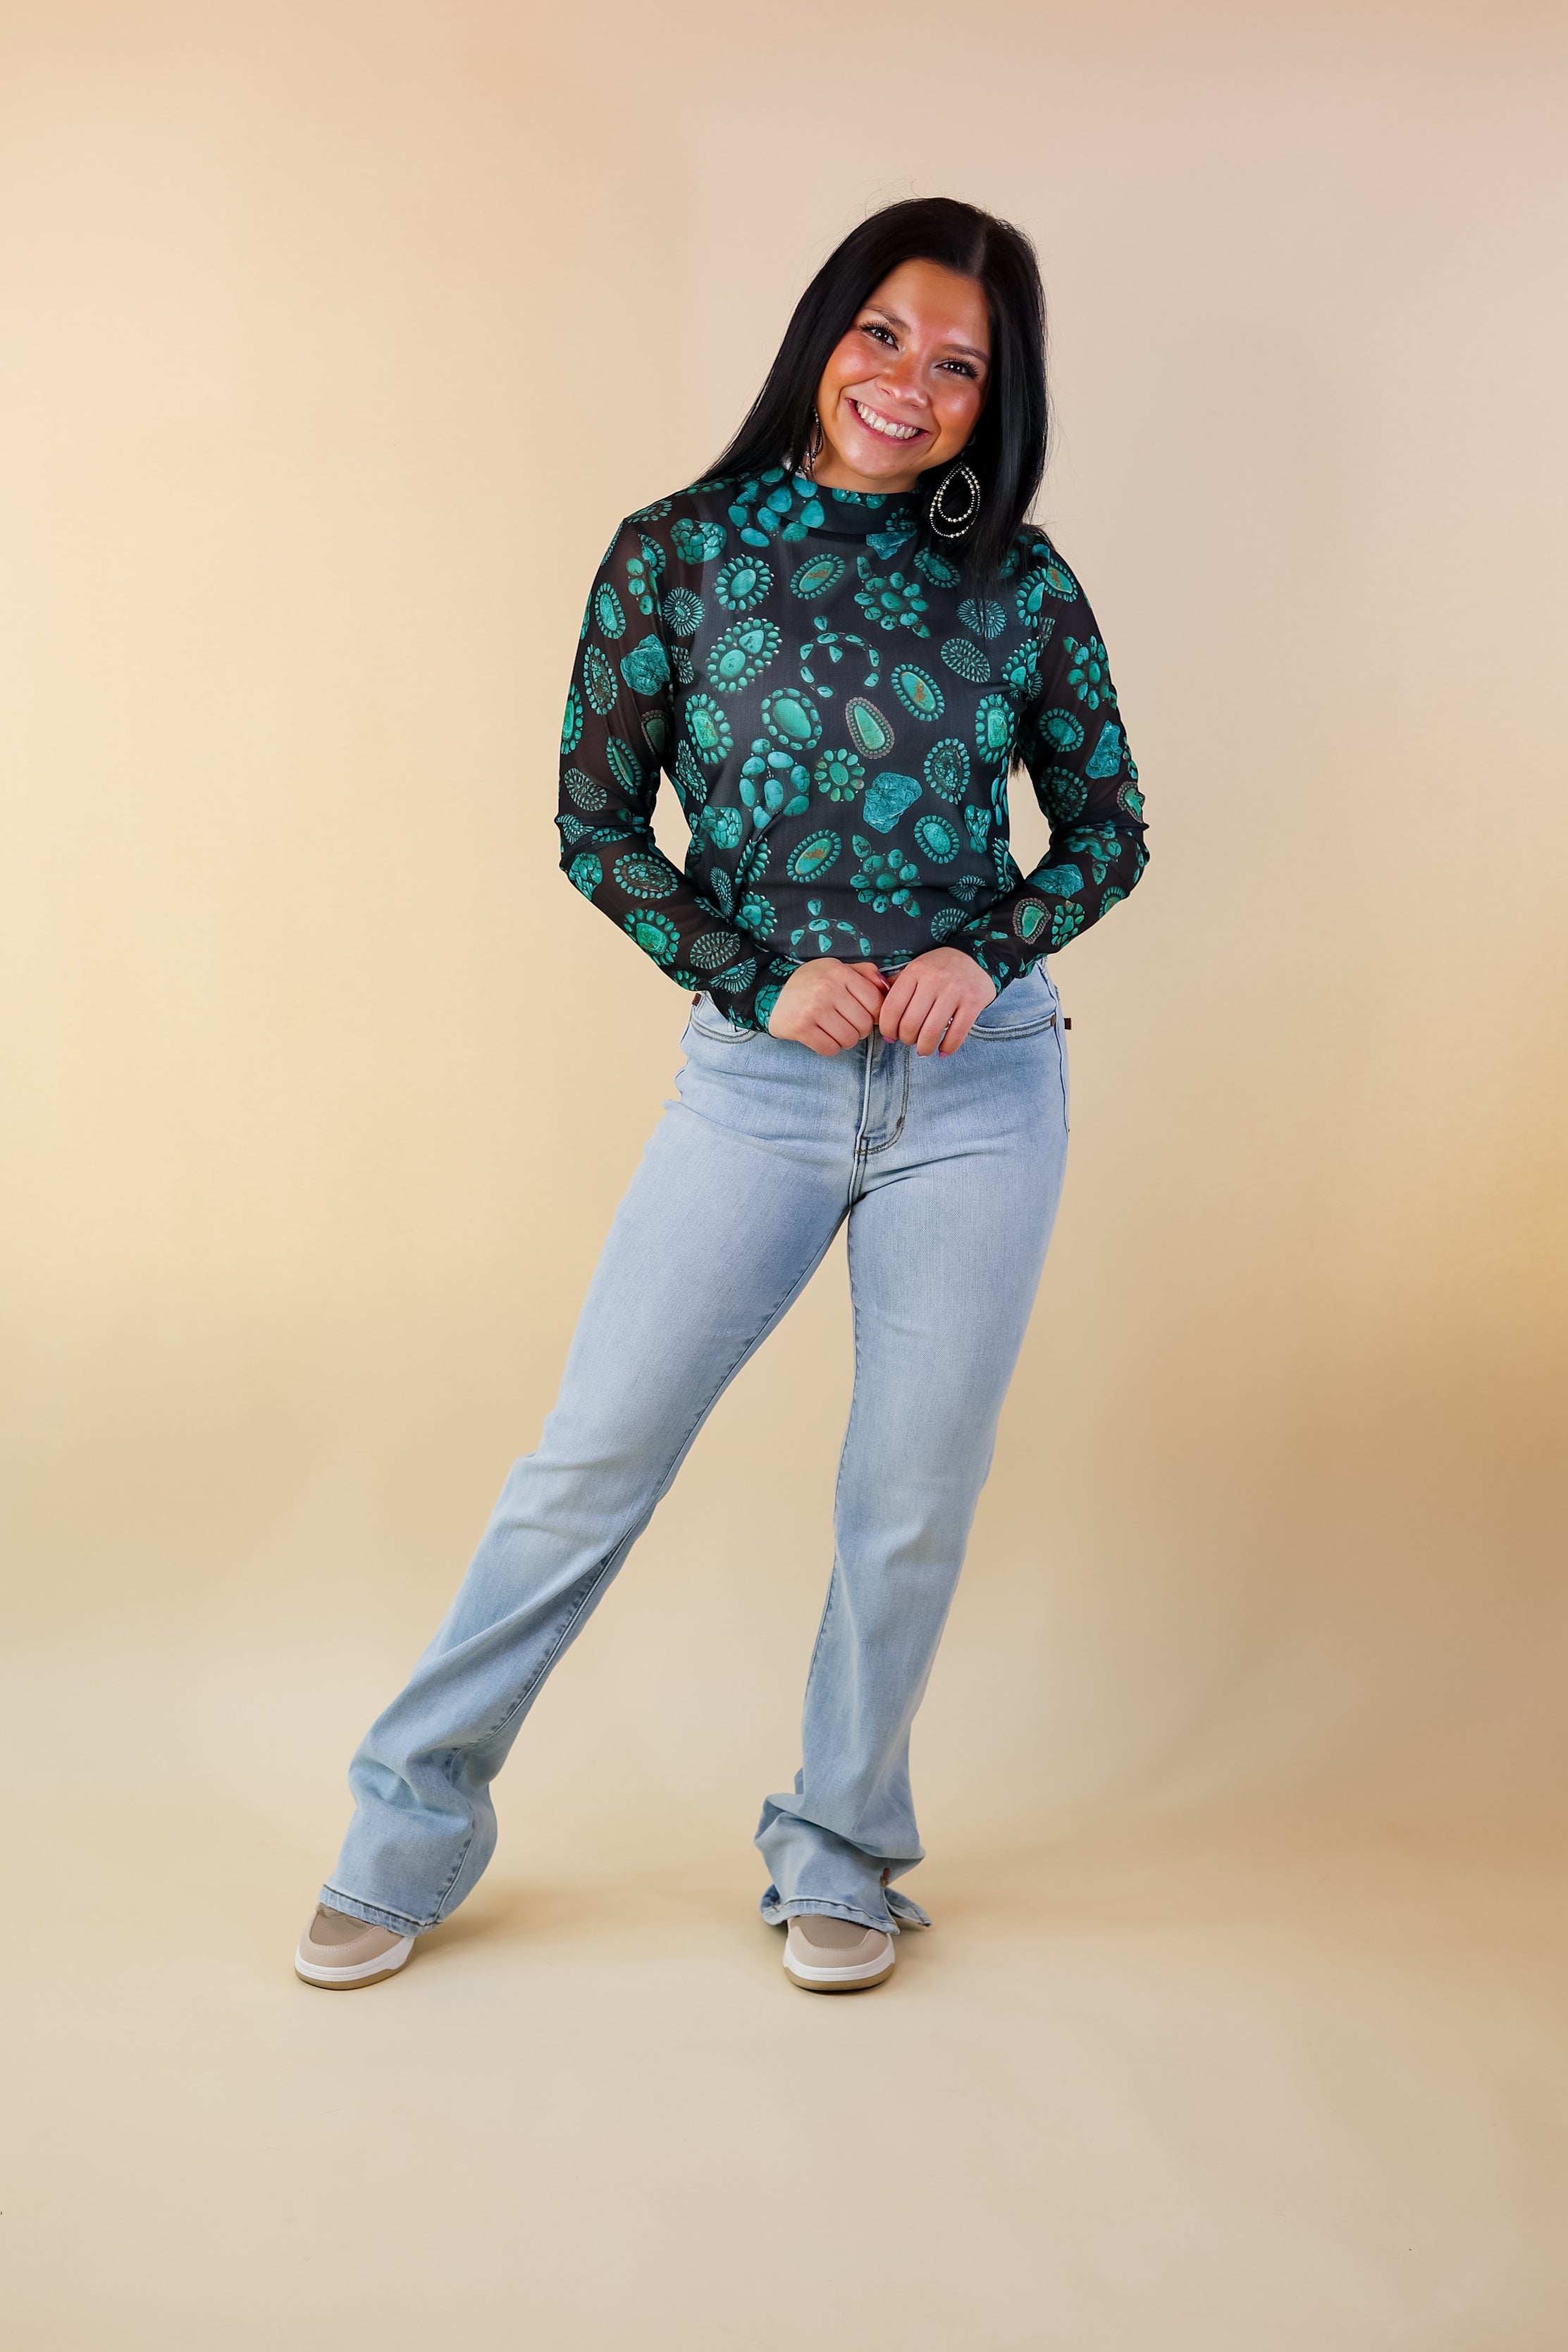 Rodeo Drive Mesh Turquoise Stone Long Sleeve Top in Black - Giddy Up Glamour Boutique